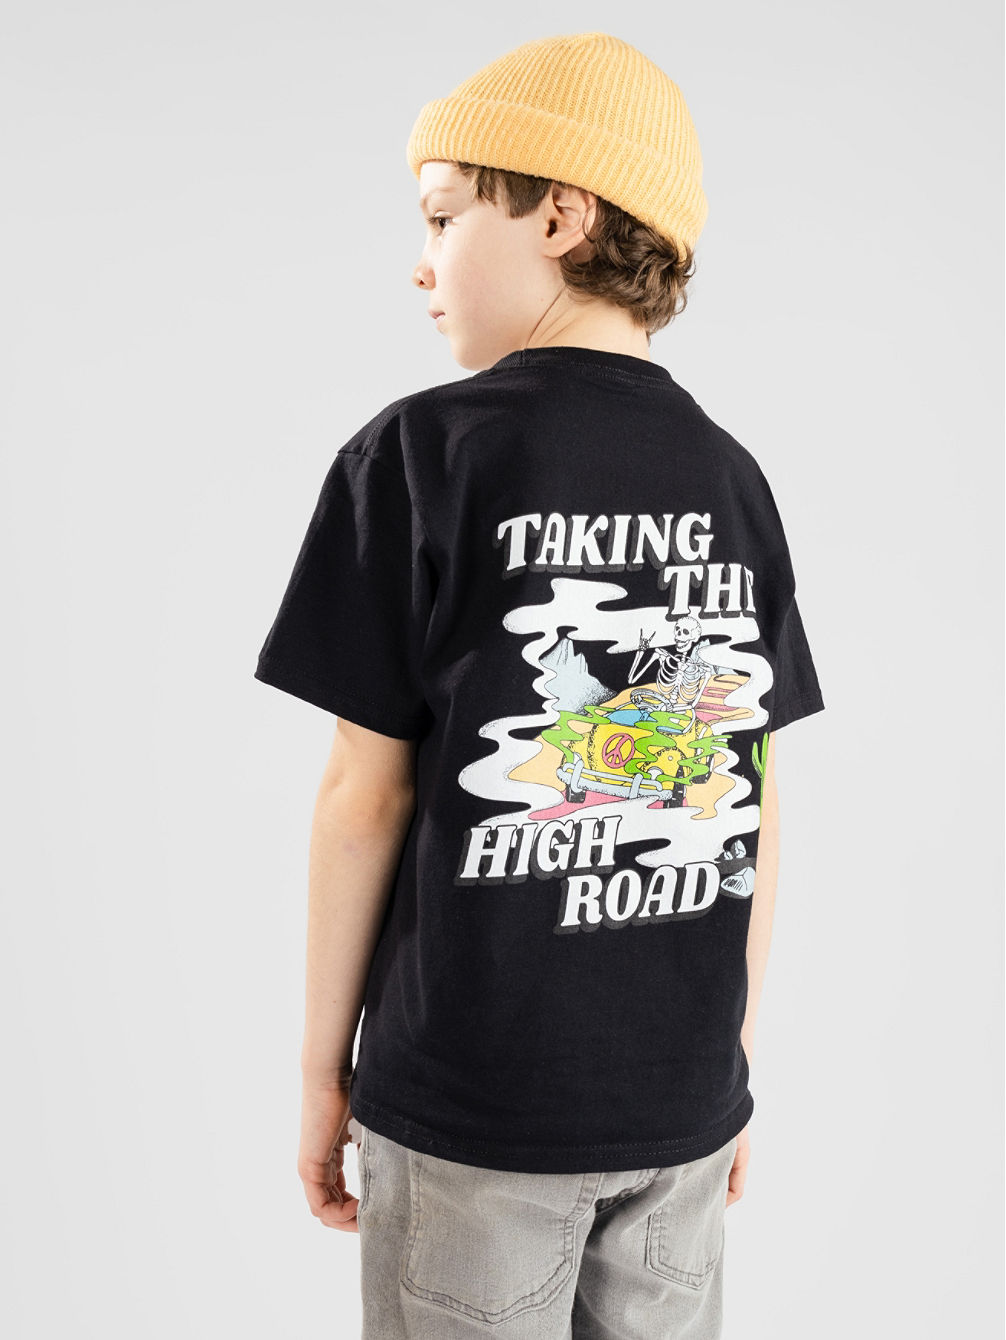 Taking The High Road T-Shirt